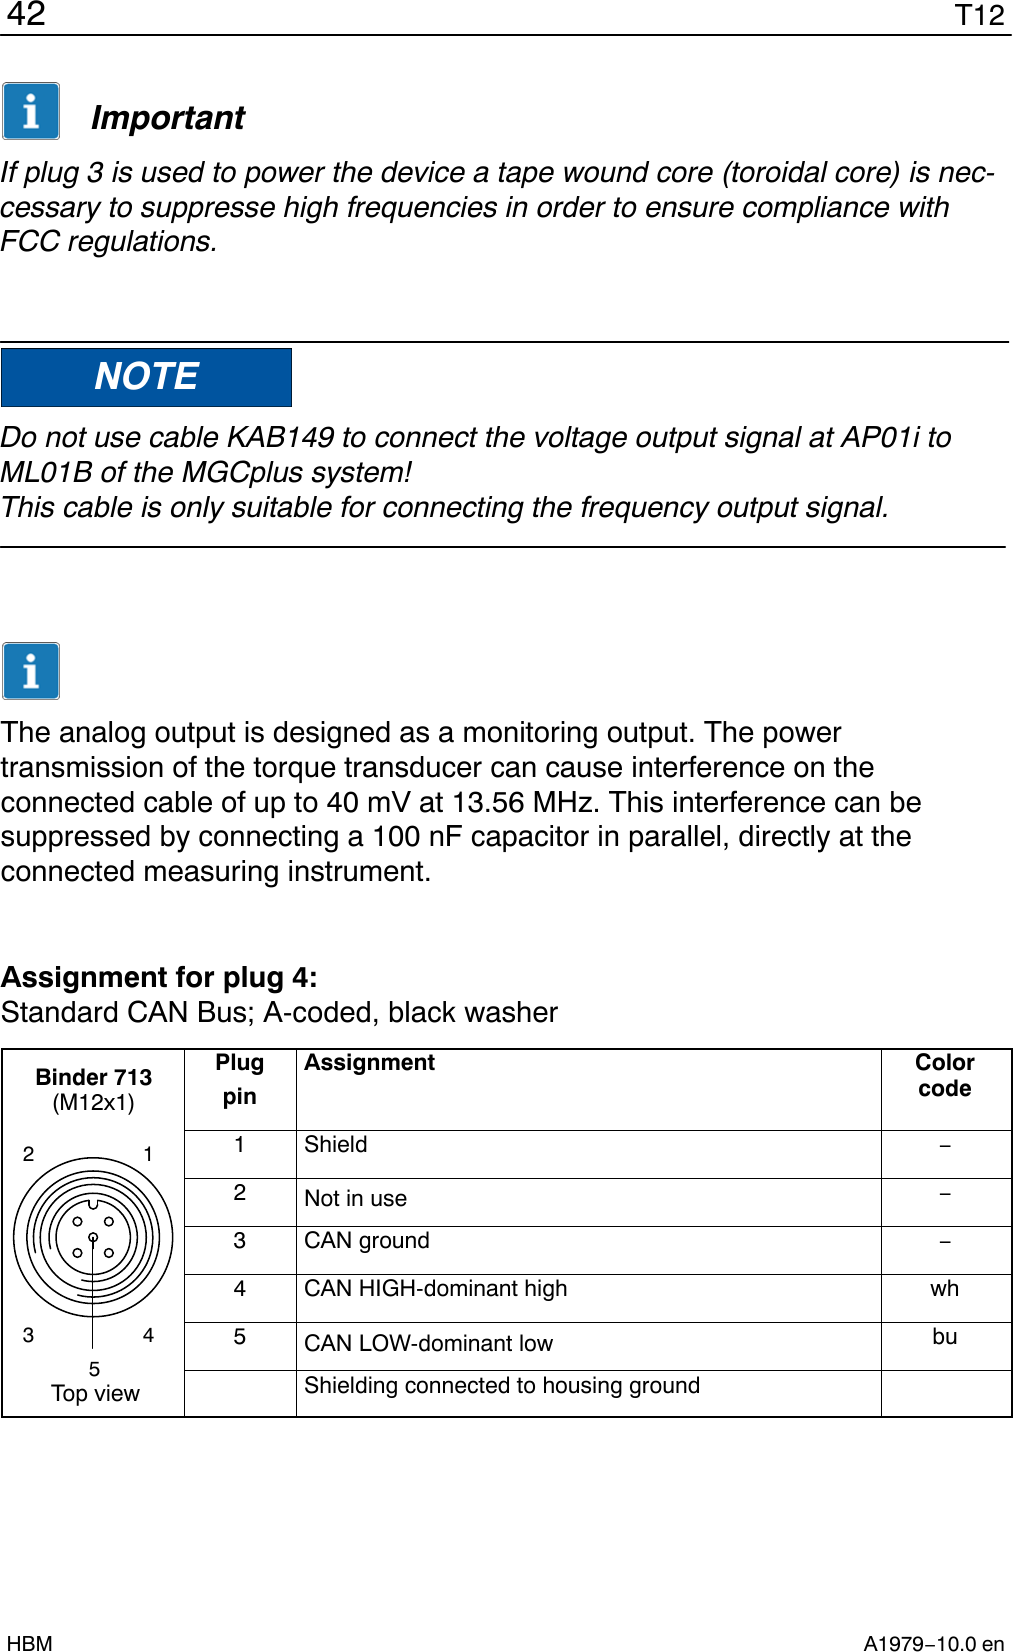 T1242A1979−10.0 enHBMImportantIf plug 3 is used to power the device a tape wound core (toroidal core) is nec-cessary to suppresse high frequencies in order to ensure compliance withFCC regulations.NOTEDo not use cable KAB149 to connect the voltage output signal at AP01i toML01B of the MGCplus system!This cable is only suitable for connecting the frequency output signal.The analog output is designed as a monitoring output. The powertransmission of the torque transducer can cause interference on theconnected cable of up to 40 mV at 13.56 MHz. This interference can besuppressed by connecting a 100 nF capacitor in parallel, directly at theconnected measuring instrument.Assignment for plug 4:Standard CAN Bus; A-coded, black washerTop view12435Binder 713(M12x1)PlugpinAssignment Colorcode1 Shield −2Not in use −3CAN ground −4CAN HIGH-dominant high wh5CAN LOW-dominant low buShielding connected to housing ground